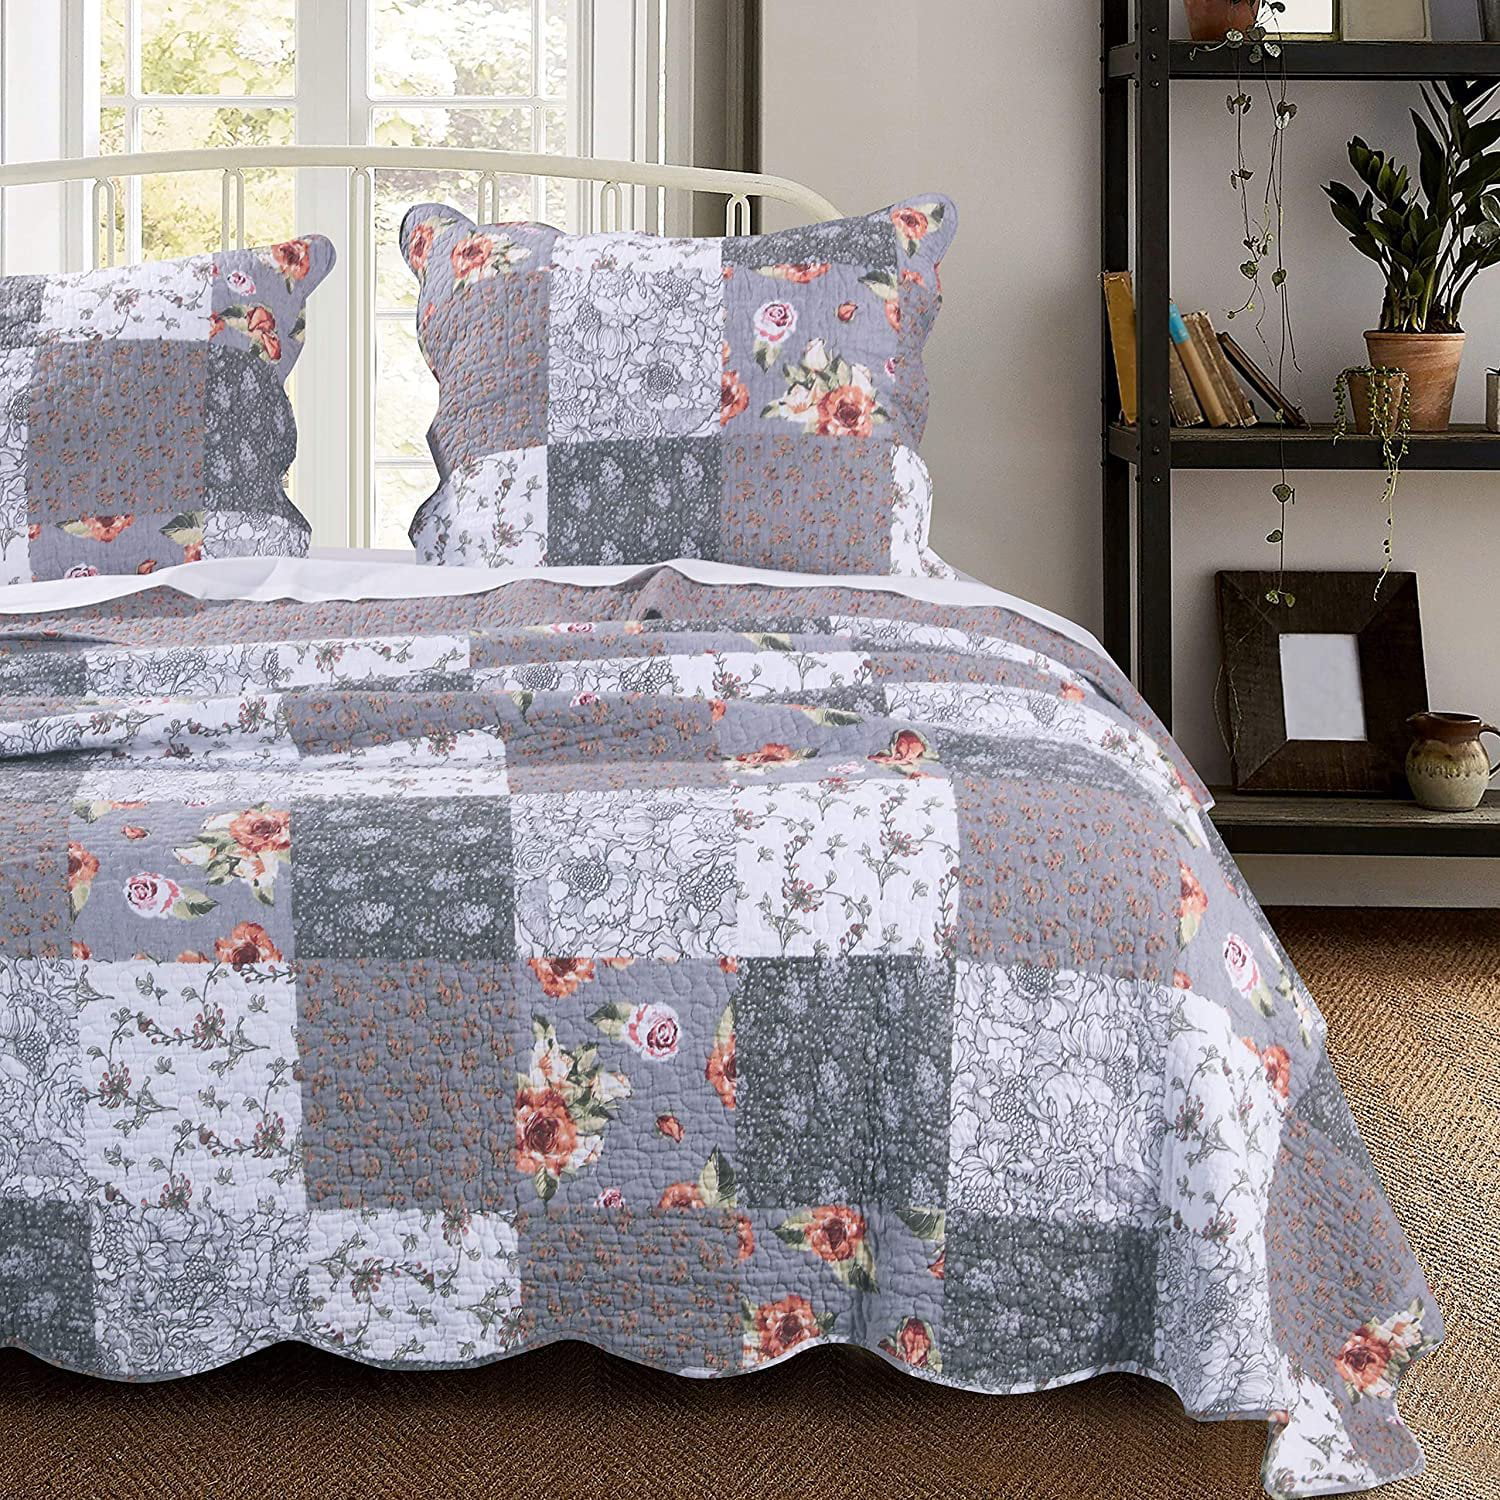 Luxury 100% Cotton Duck Egg Blue Floral Patchwork Quilted Bedspread country NEW